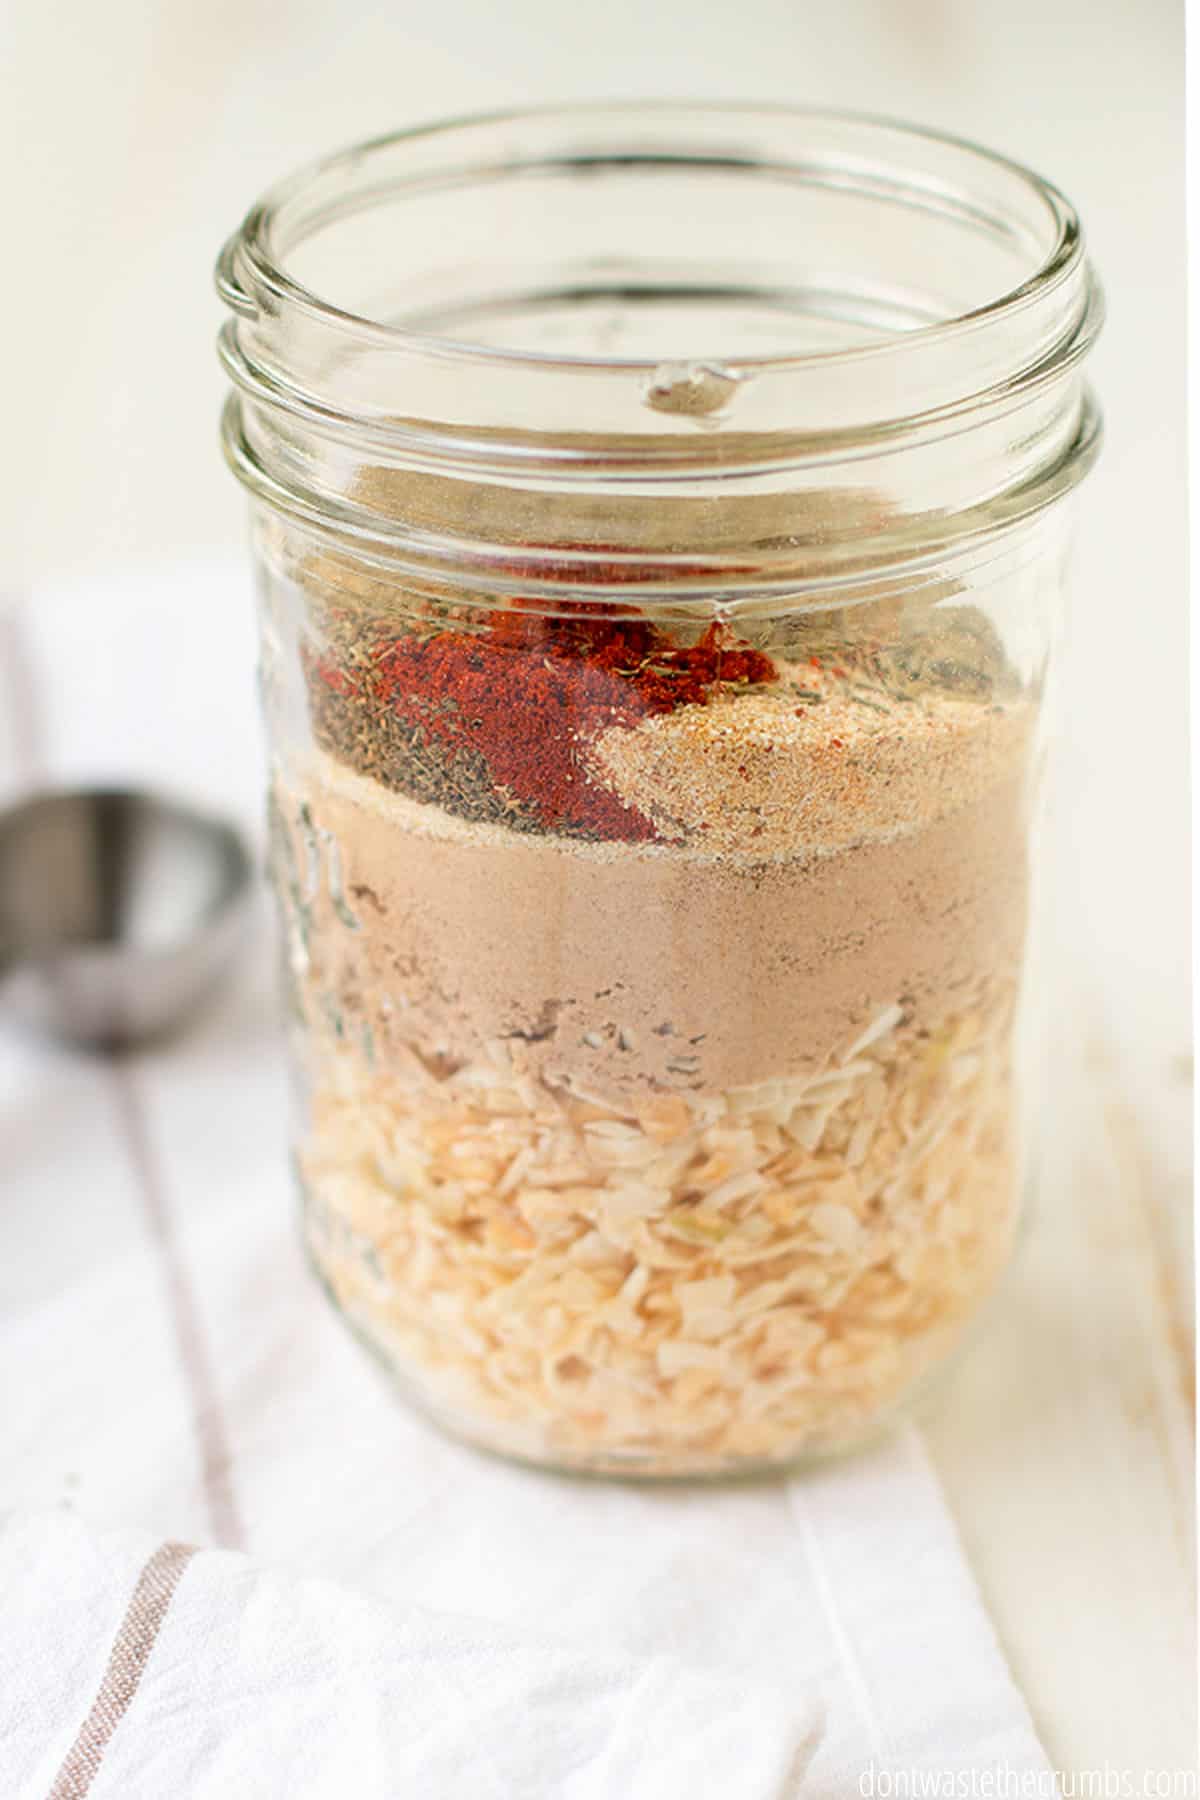 Glass jar with ingredients for dry onion soup mix.